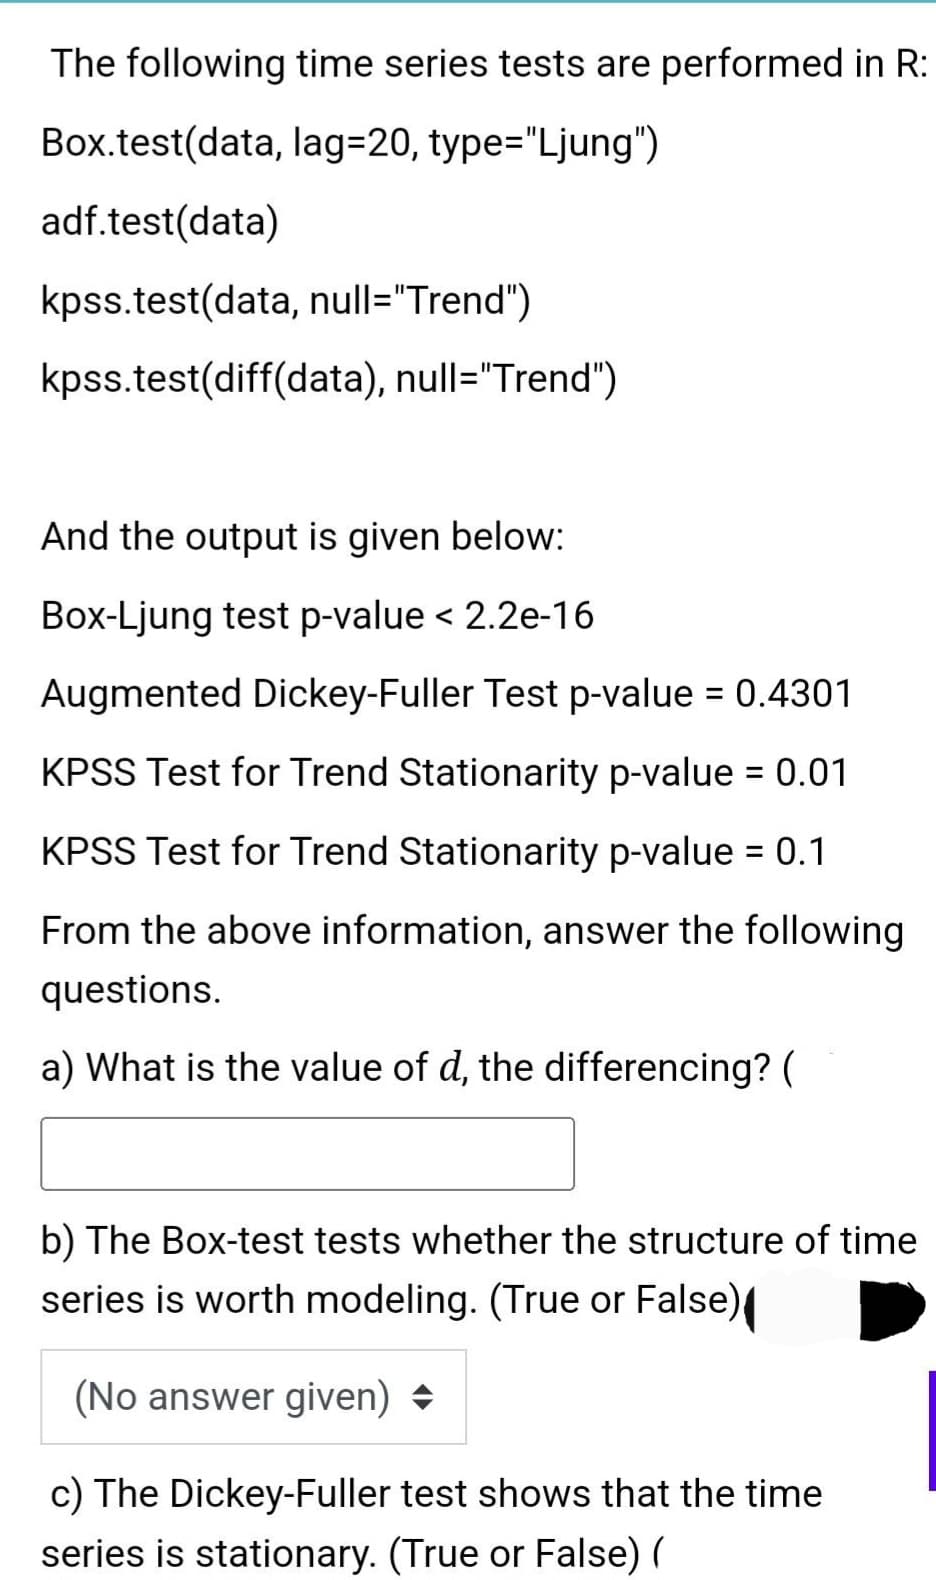 The following time series tests are performed in R:
Box.test(data, lag=20, type="Ljung")
adf.test(data)
kpss.test(data, null="Trend")
kpss.test(diff(data), null="Trend")
And the output is given below:
Box-Ljung test p-value < 2.2e-16
Augmented Dickey-Fuller Test p-value = 0.4301
KPSS Test for Trend Stationarity p-value = 0.01
KPSS Test for Trend Stationarity p-value = 0.1
From the above information, answer the following
questions.
a) What is the value of d, the differencing? (
b) The Box-test tests whether the structure of time
series is worth modeling. (True or False)
(No answer given) →
c) The Dickey-Fuller test shows that the time
series is stationary. (True or False) (